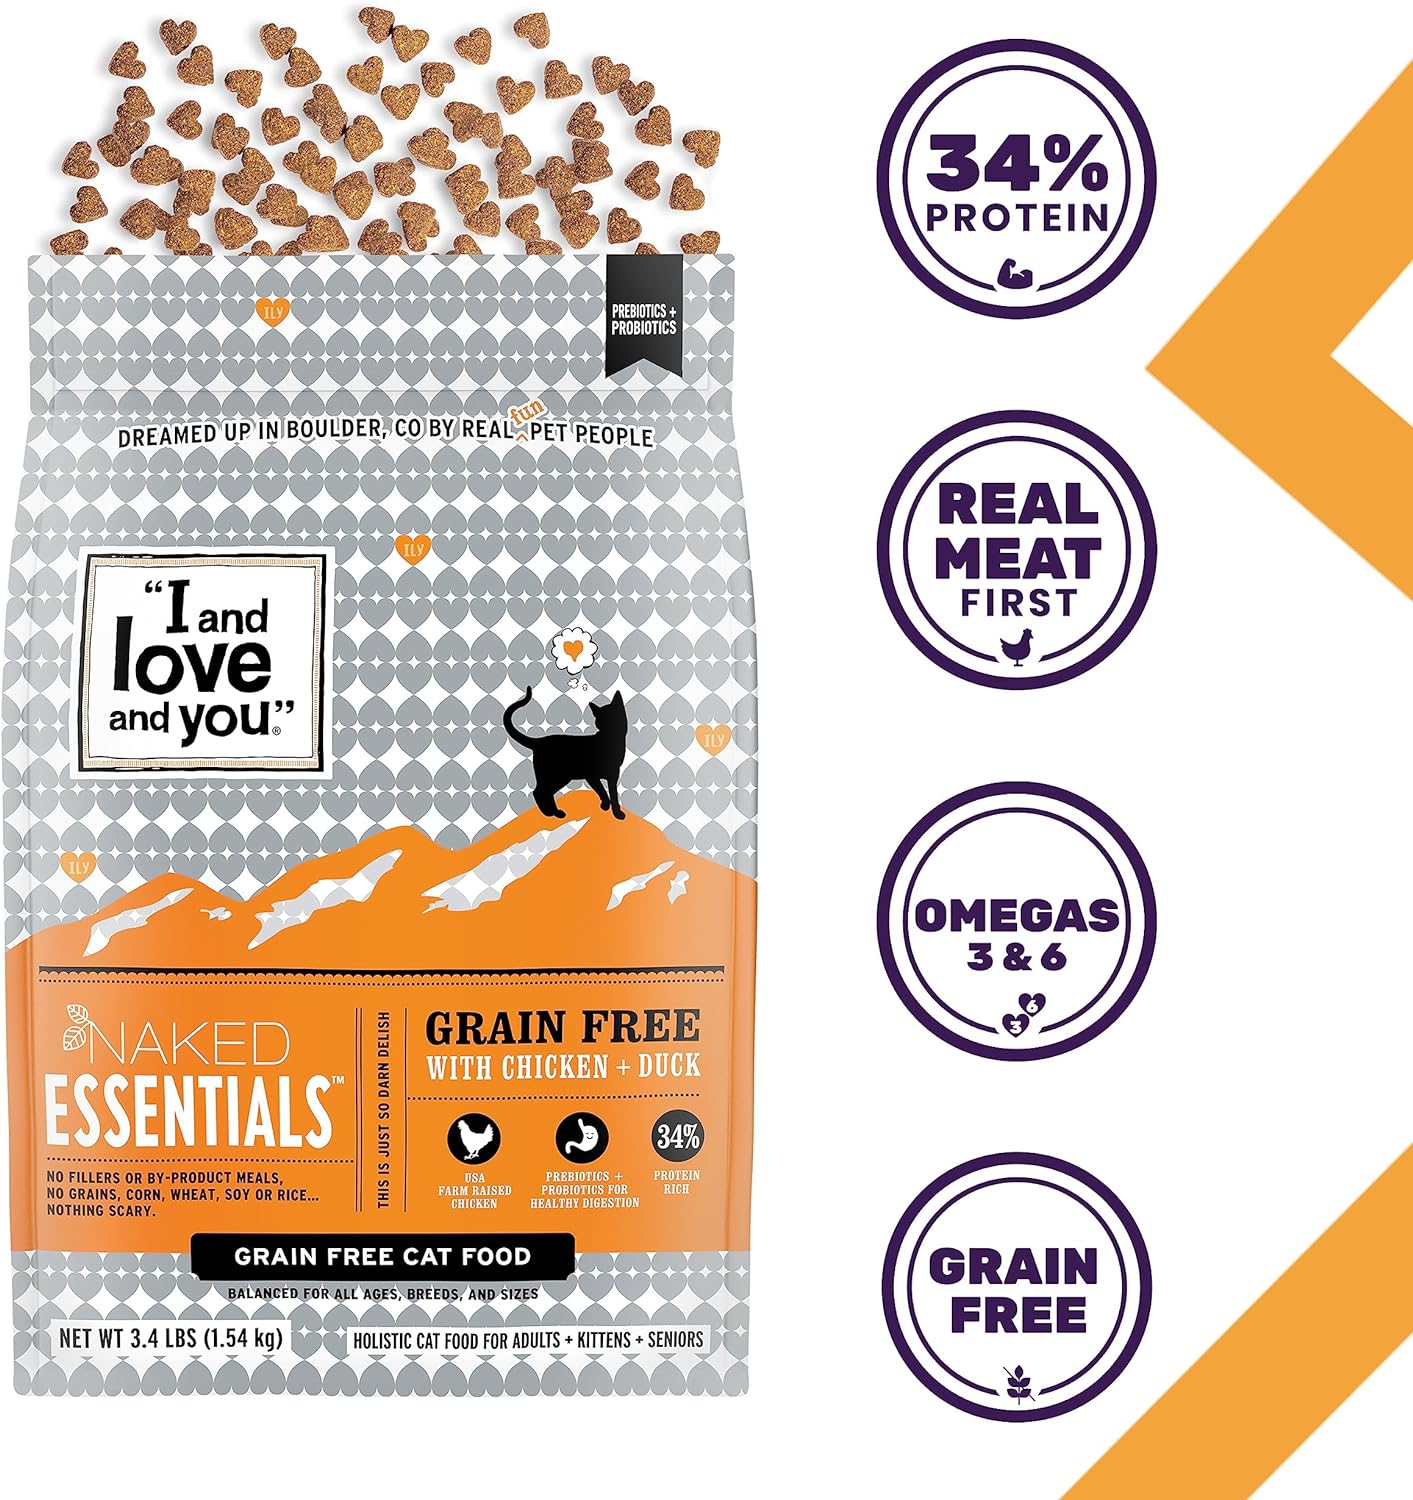 I and Love and You Naked Essentials Grain-Free with Chicken + Duck Dry Dog Food – Gallery Image 3